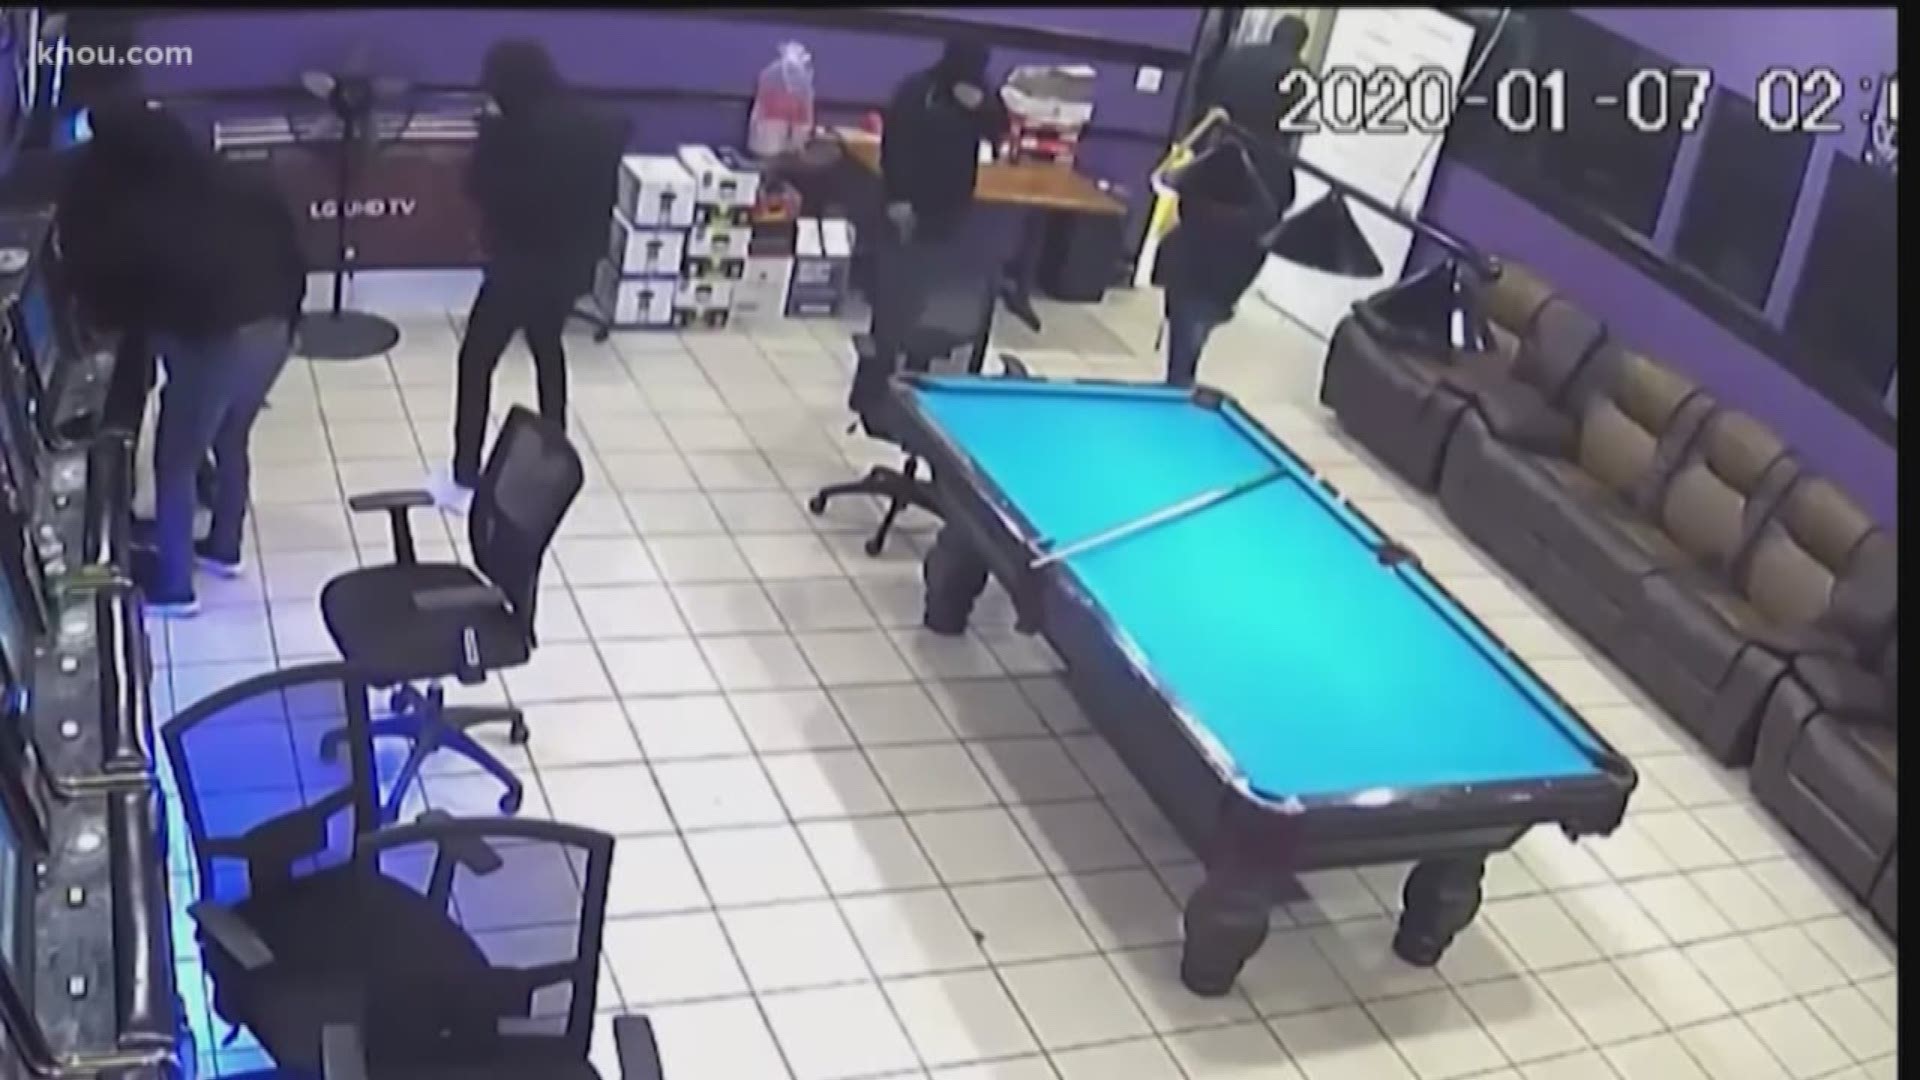 Police released video of eight armed robbers who stormed a Houston restaurant. There were employees inside who tried to hide from the robbers.